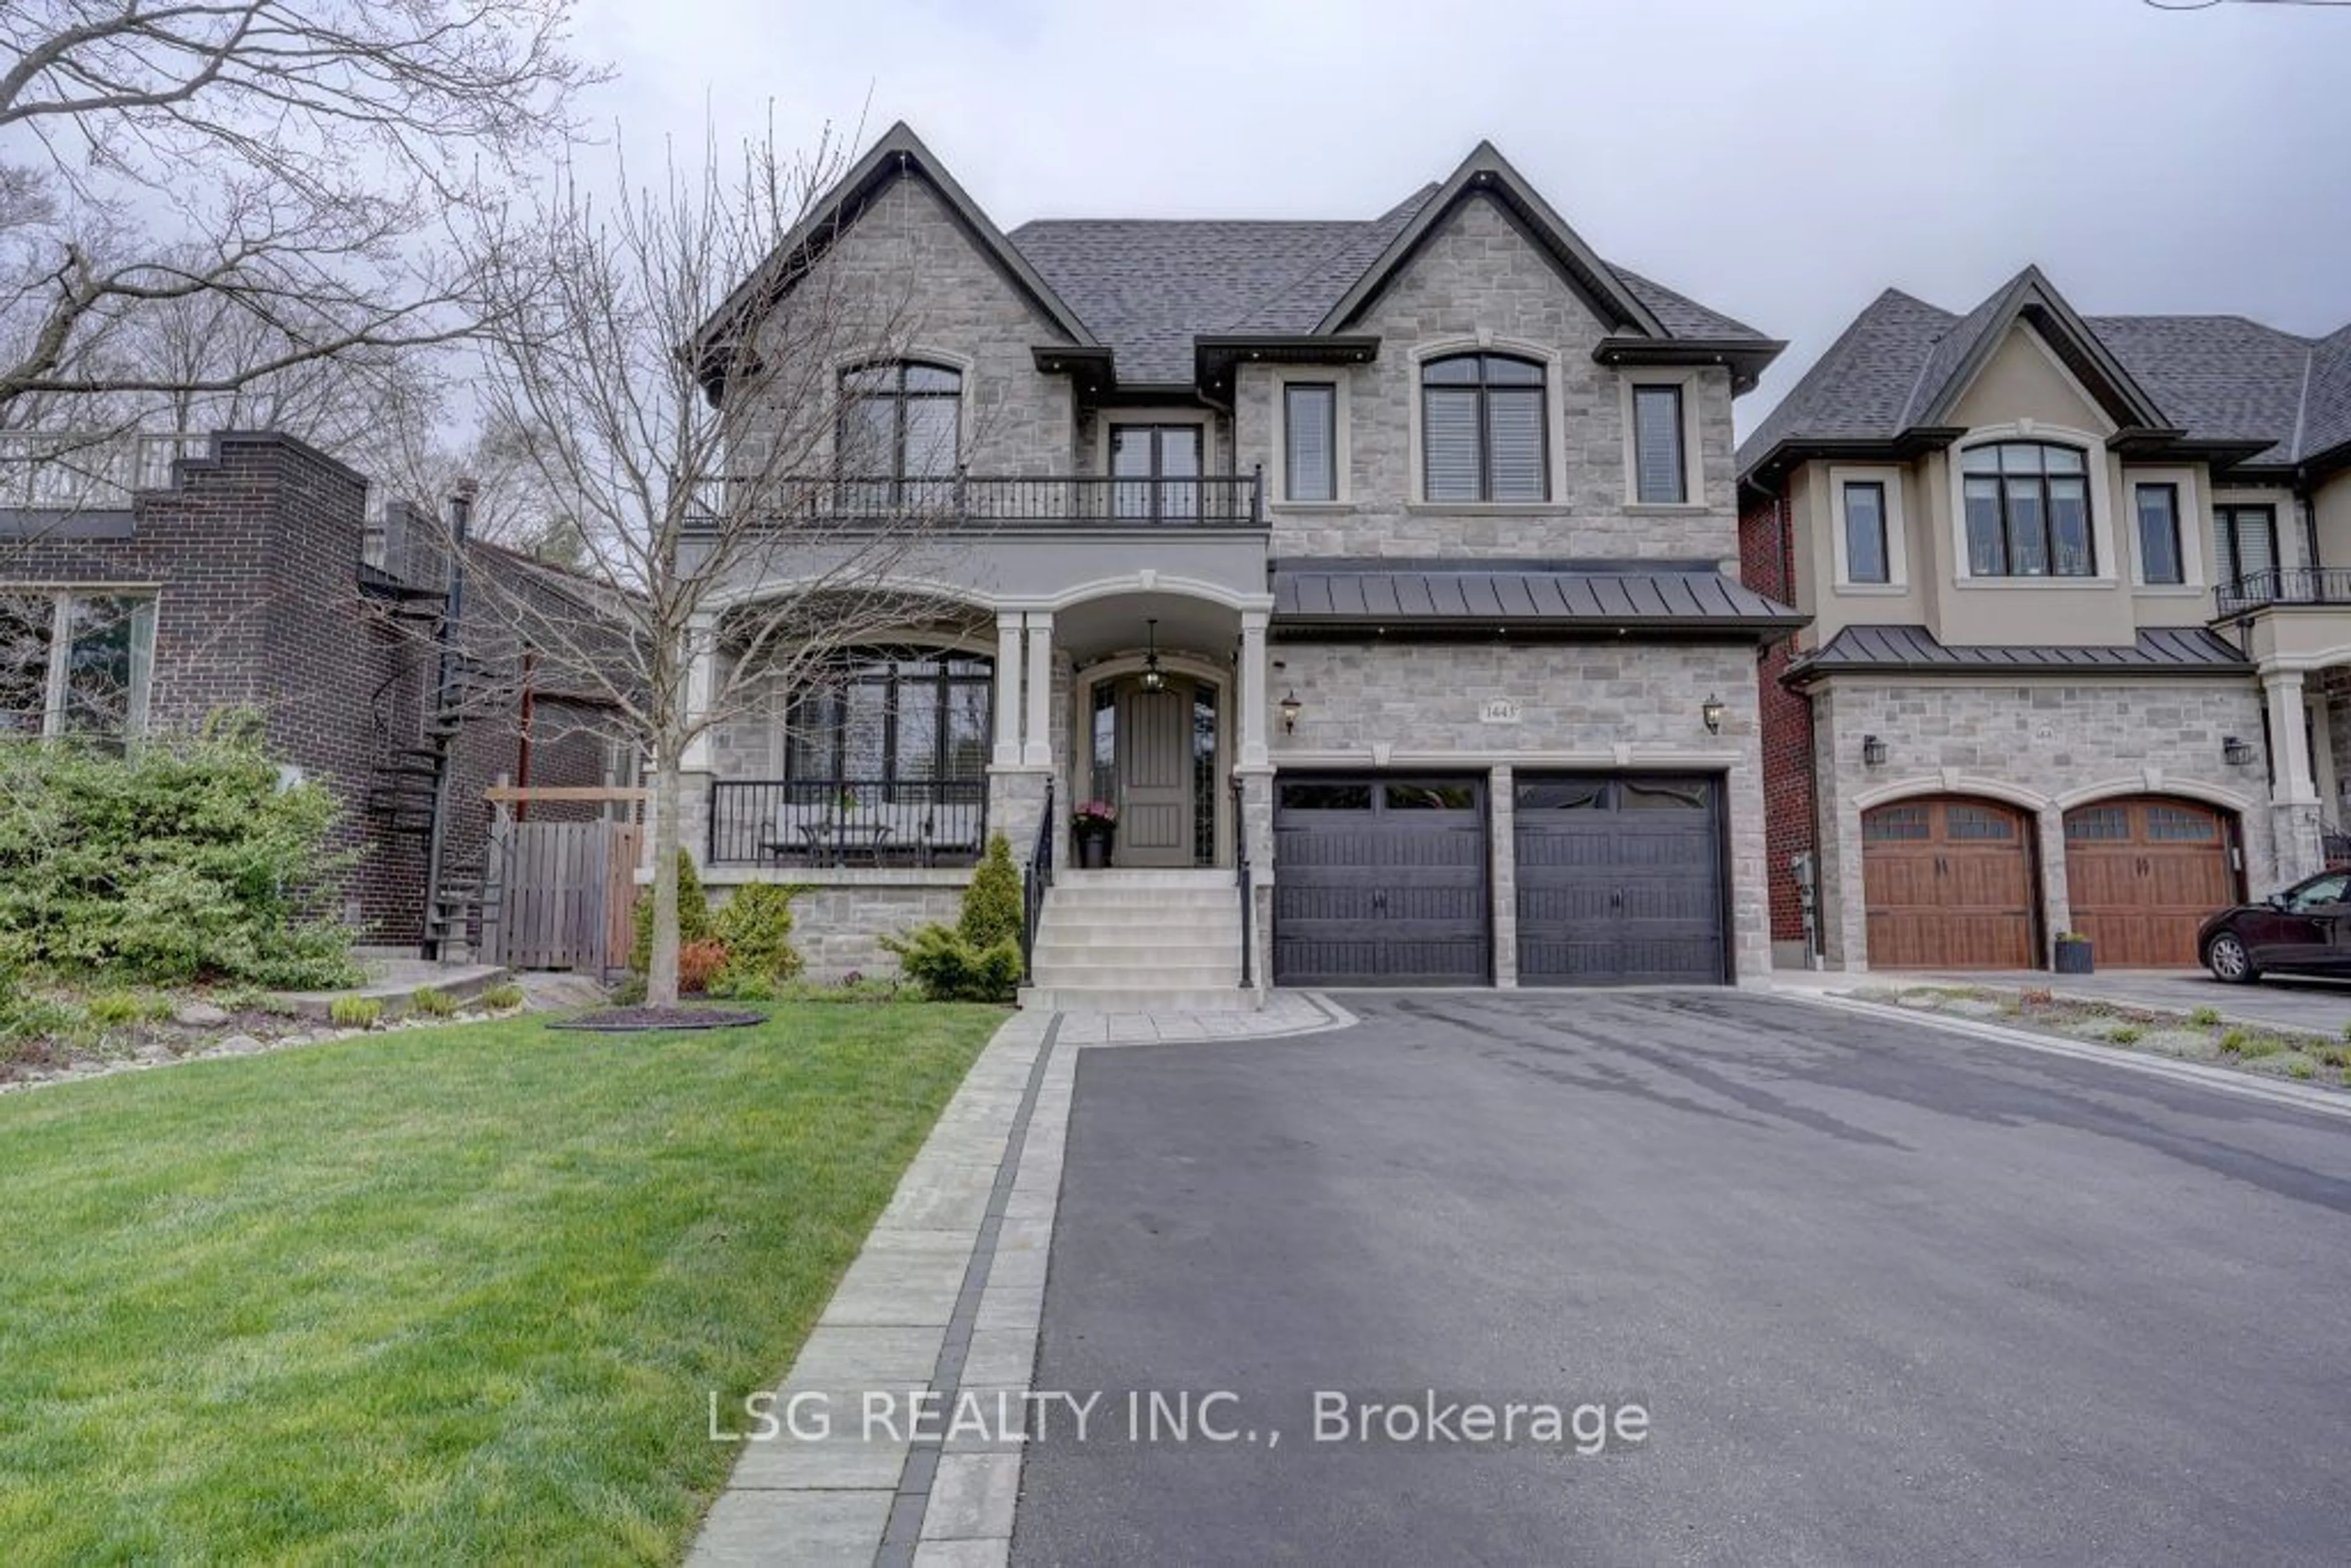 Home with brick exterior material for 1443 Highbush Tr, Pickering Ontario L1V 1N6